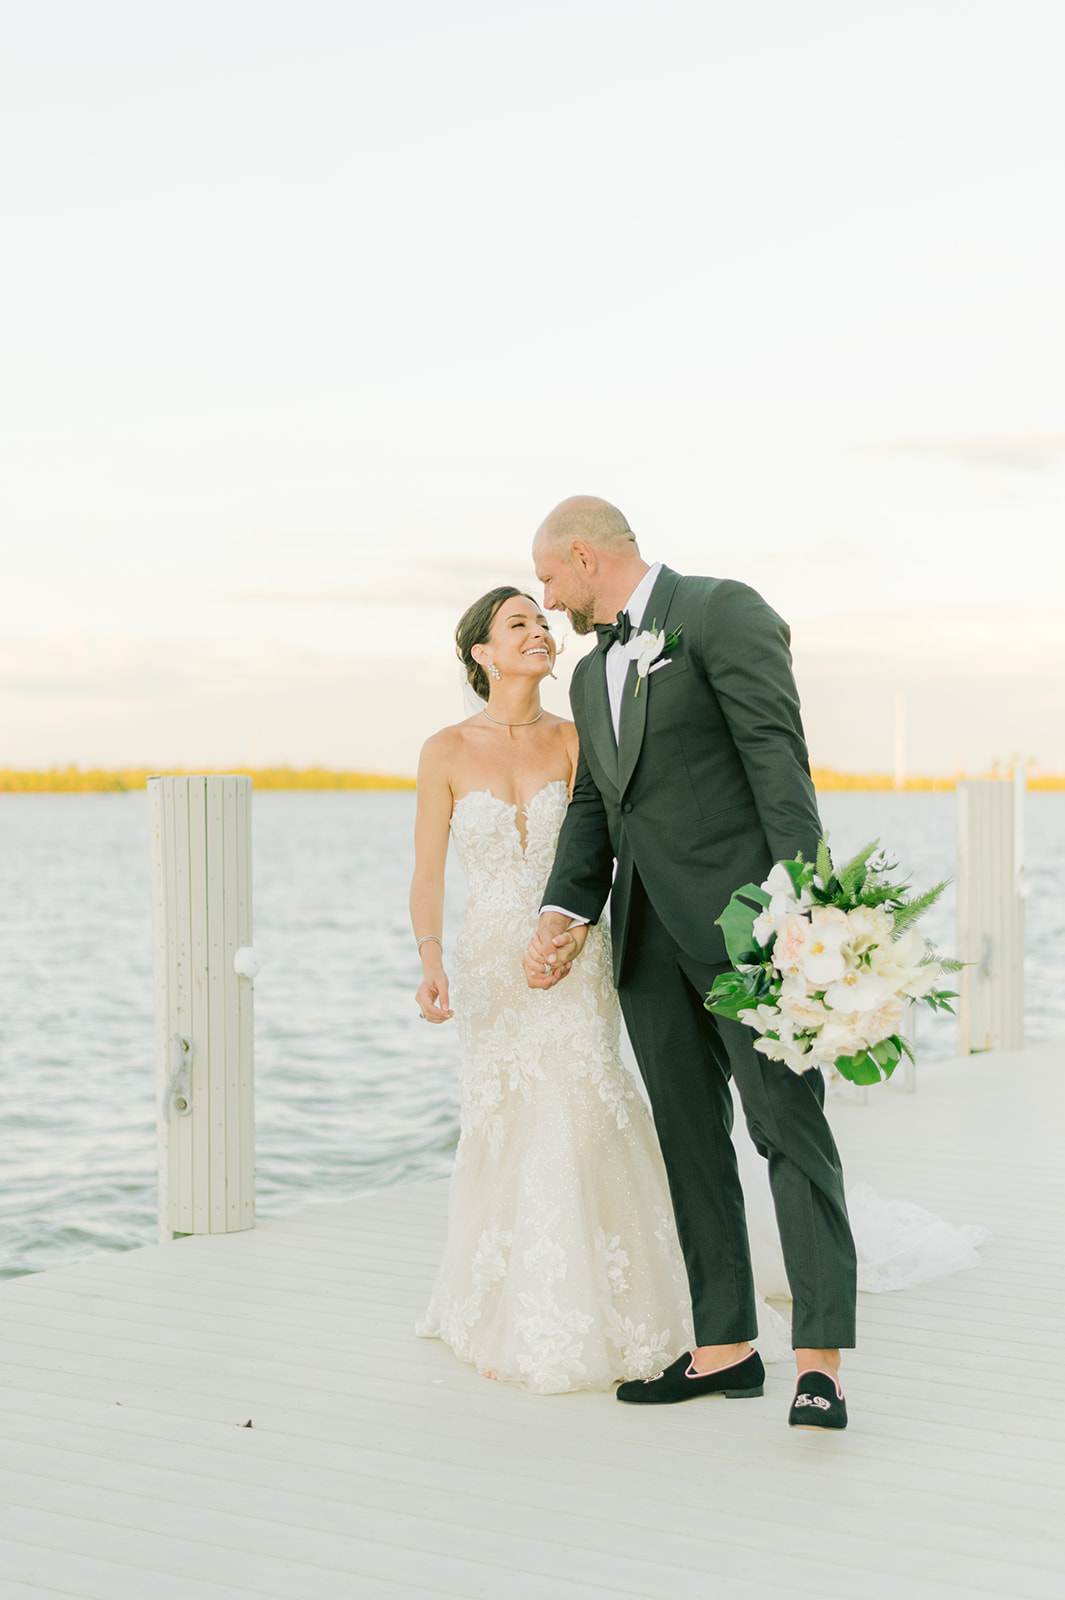 Fine Art Wedding Photography in Marco Island - A Perfectly Captured Love Story
